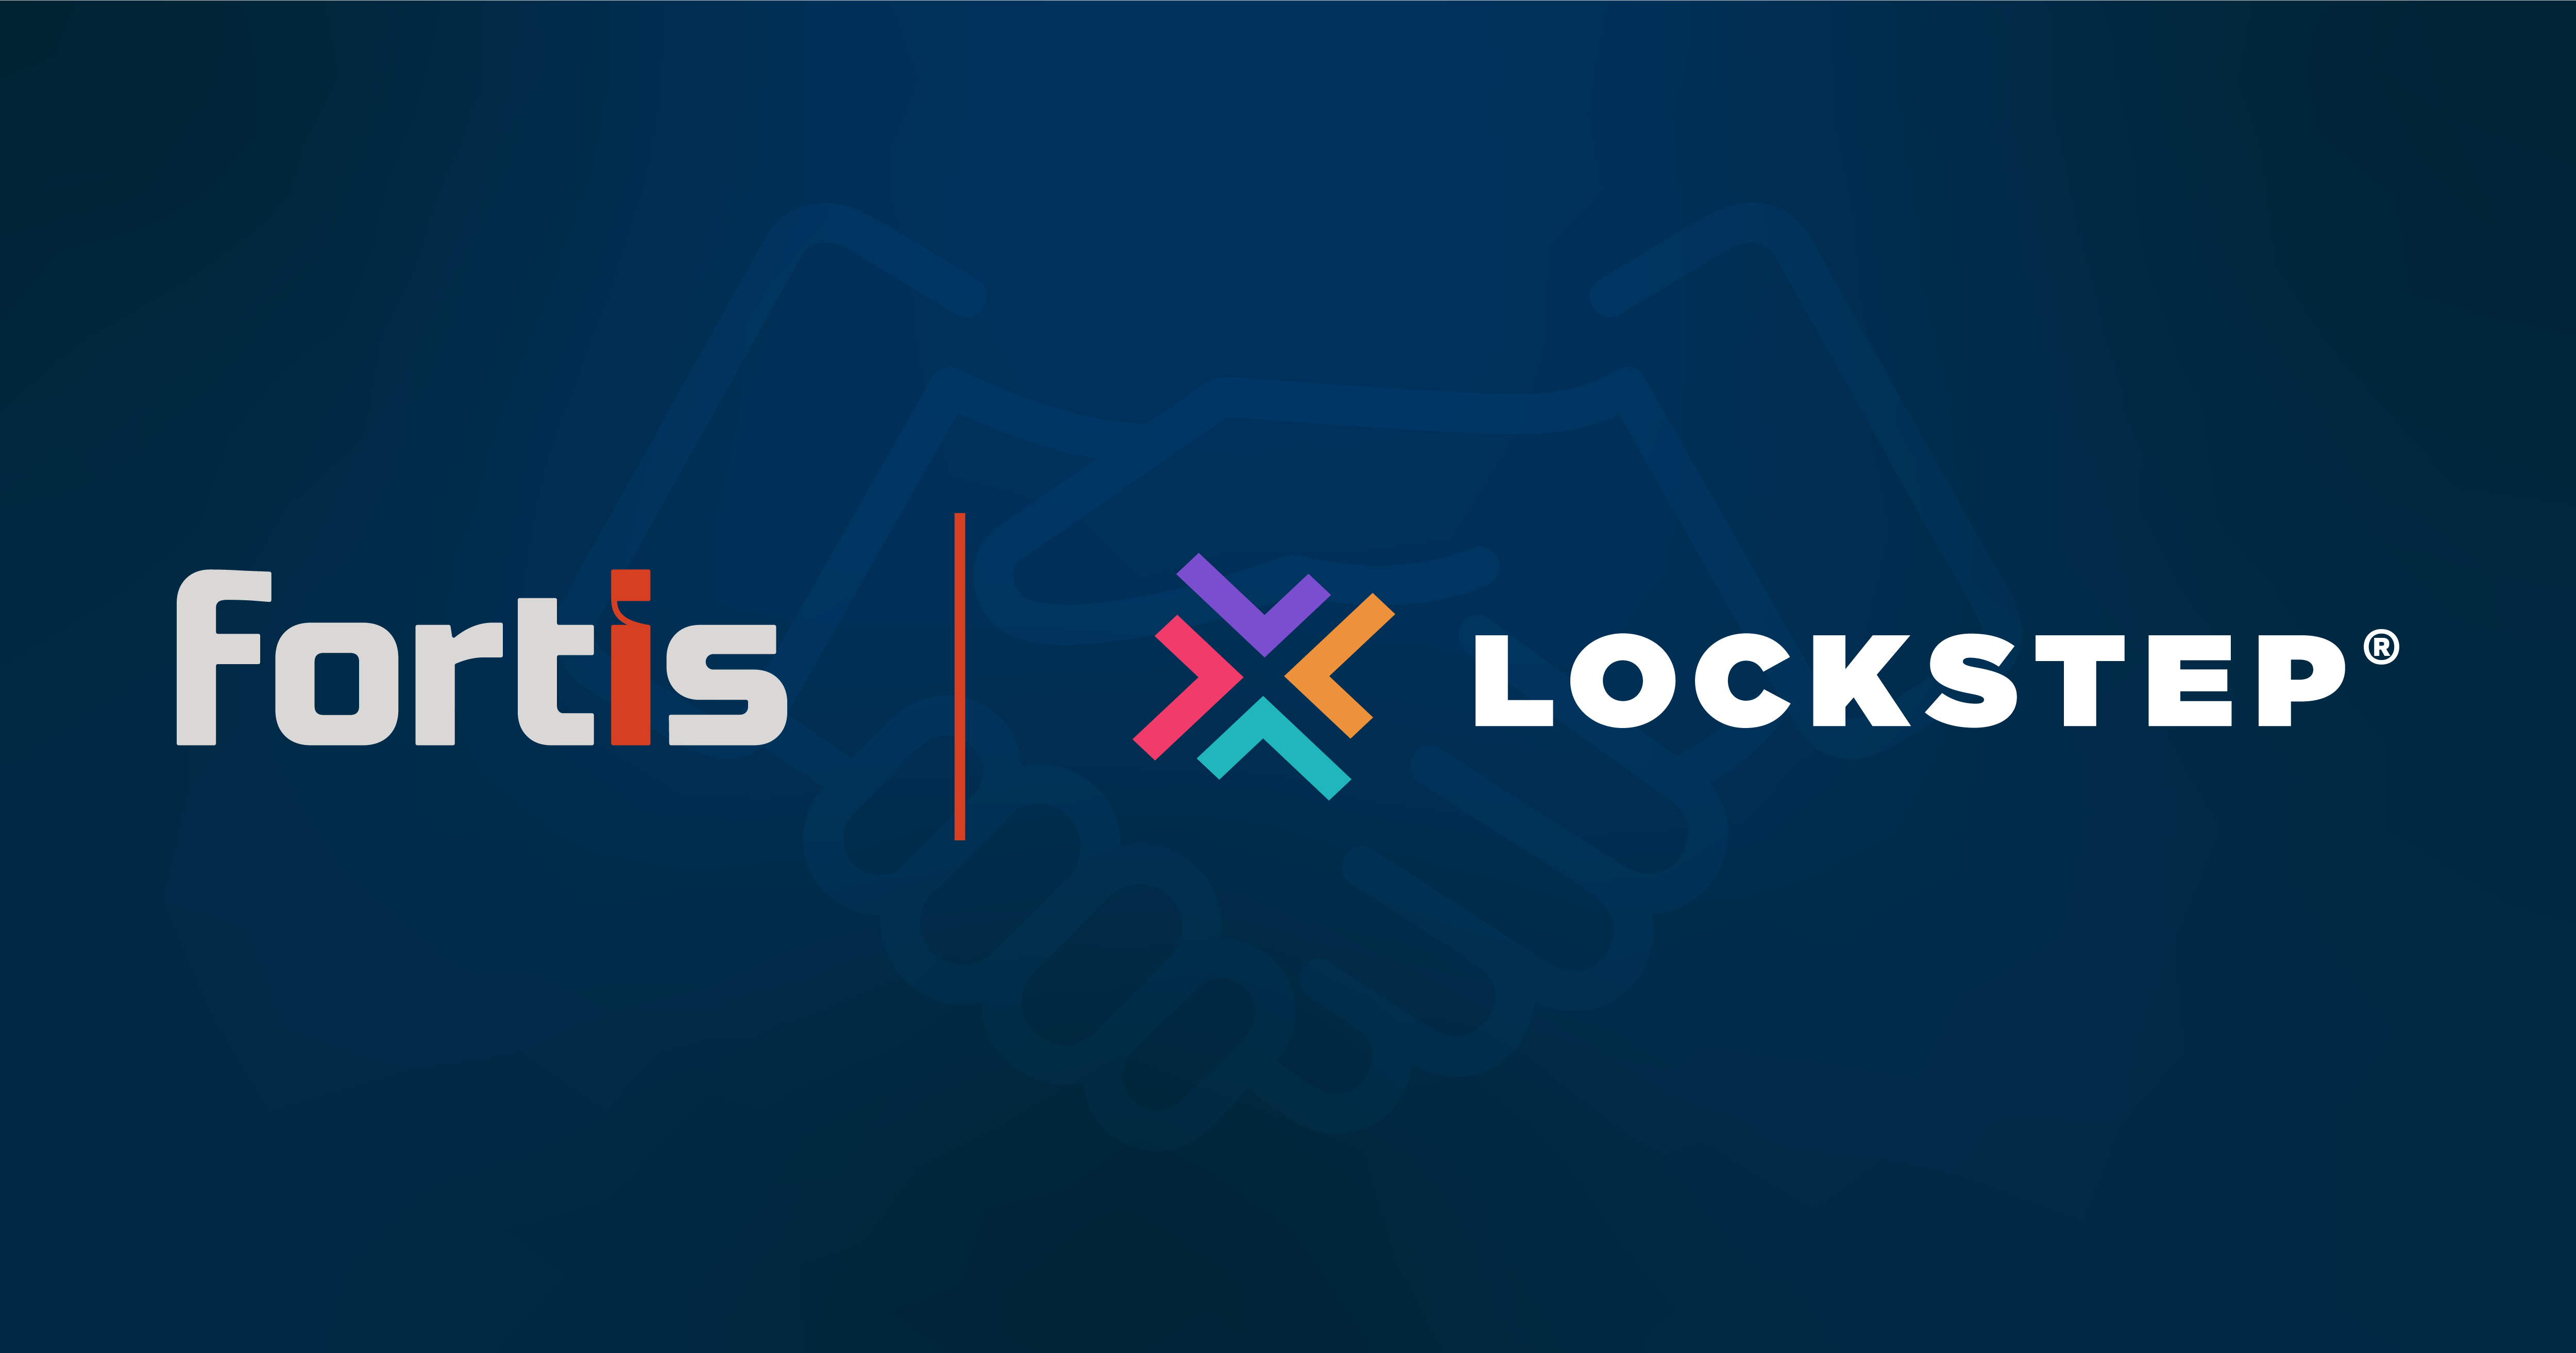 Fortis and Lockstep Partner to Offer ERP-Integrated Solutions for Automating Collections, Accepting Online Payments and Improving Cash Flow - Featured Image